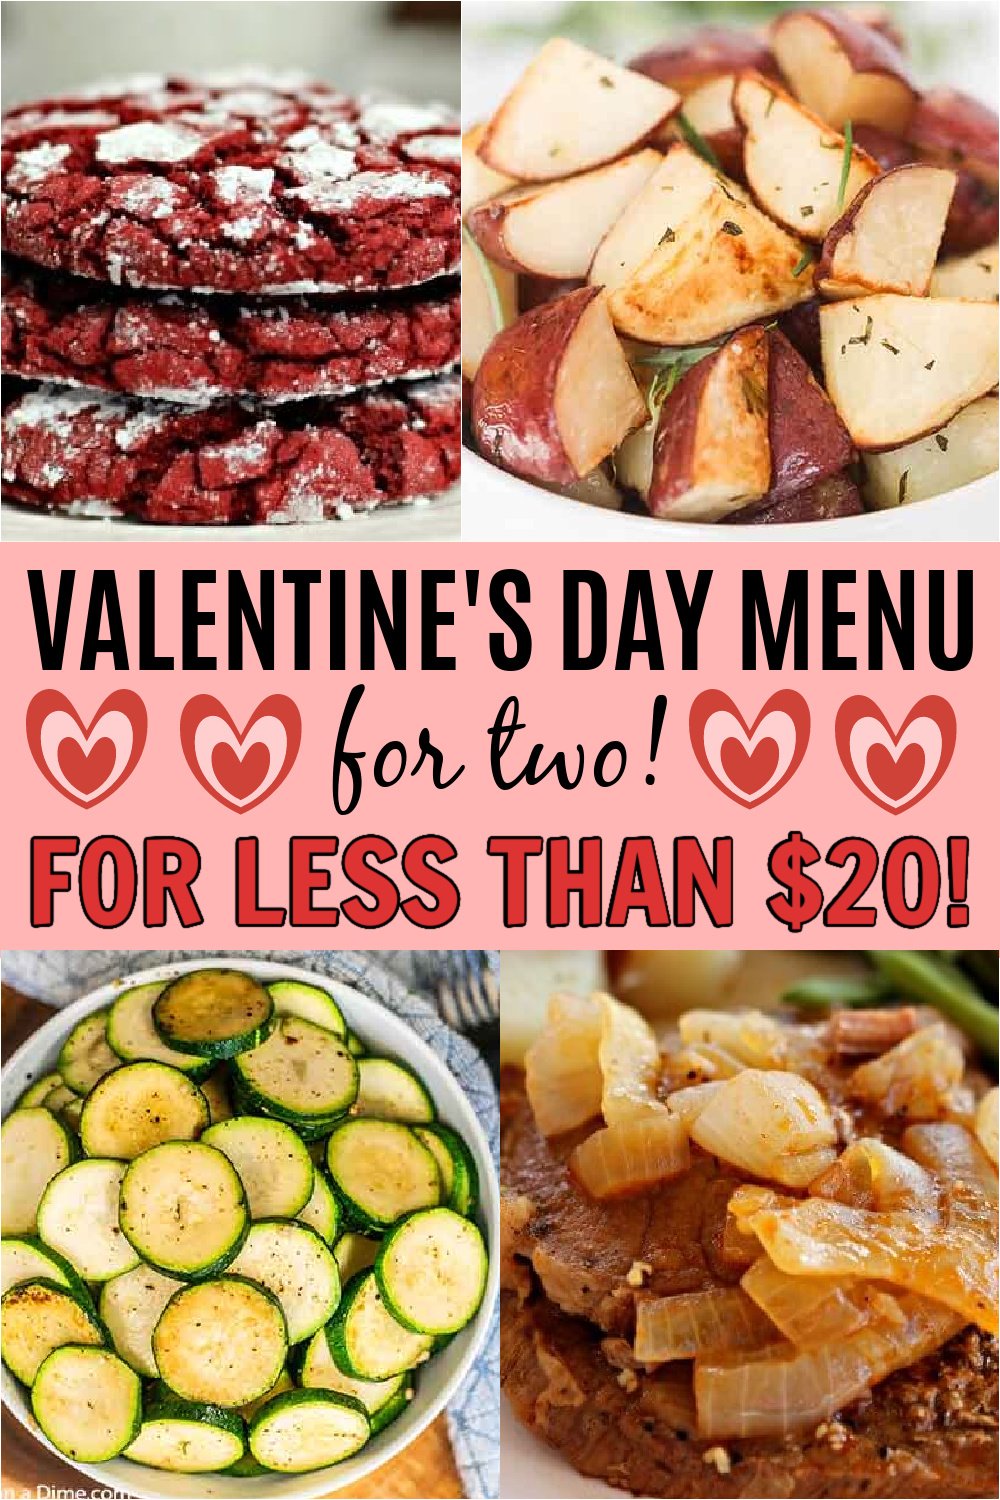 Valentine's Day - Dinner for 2 people